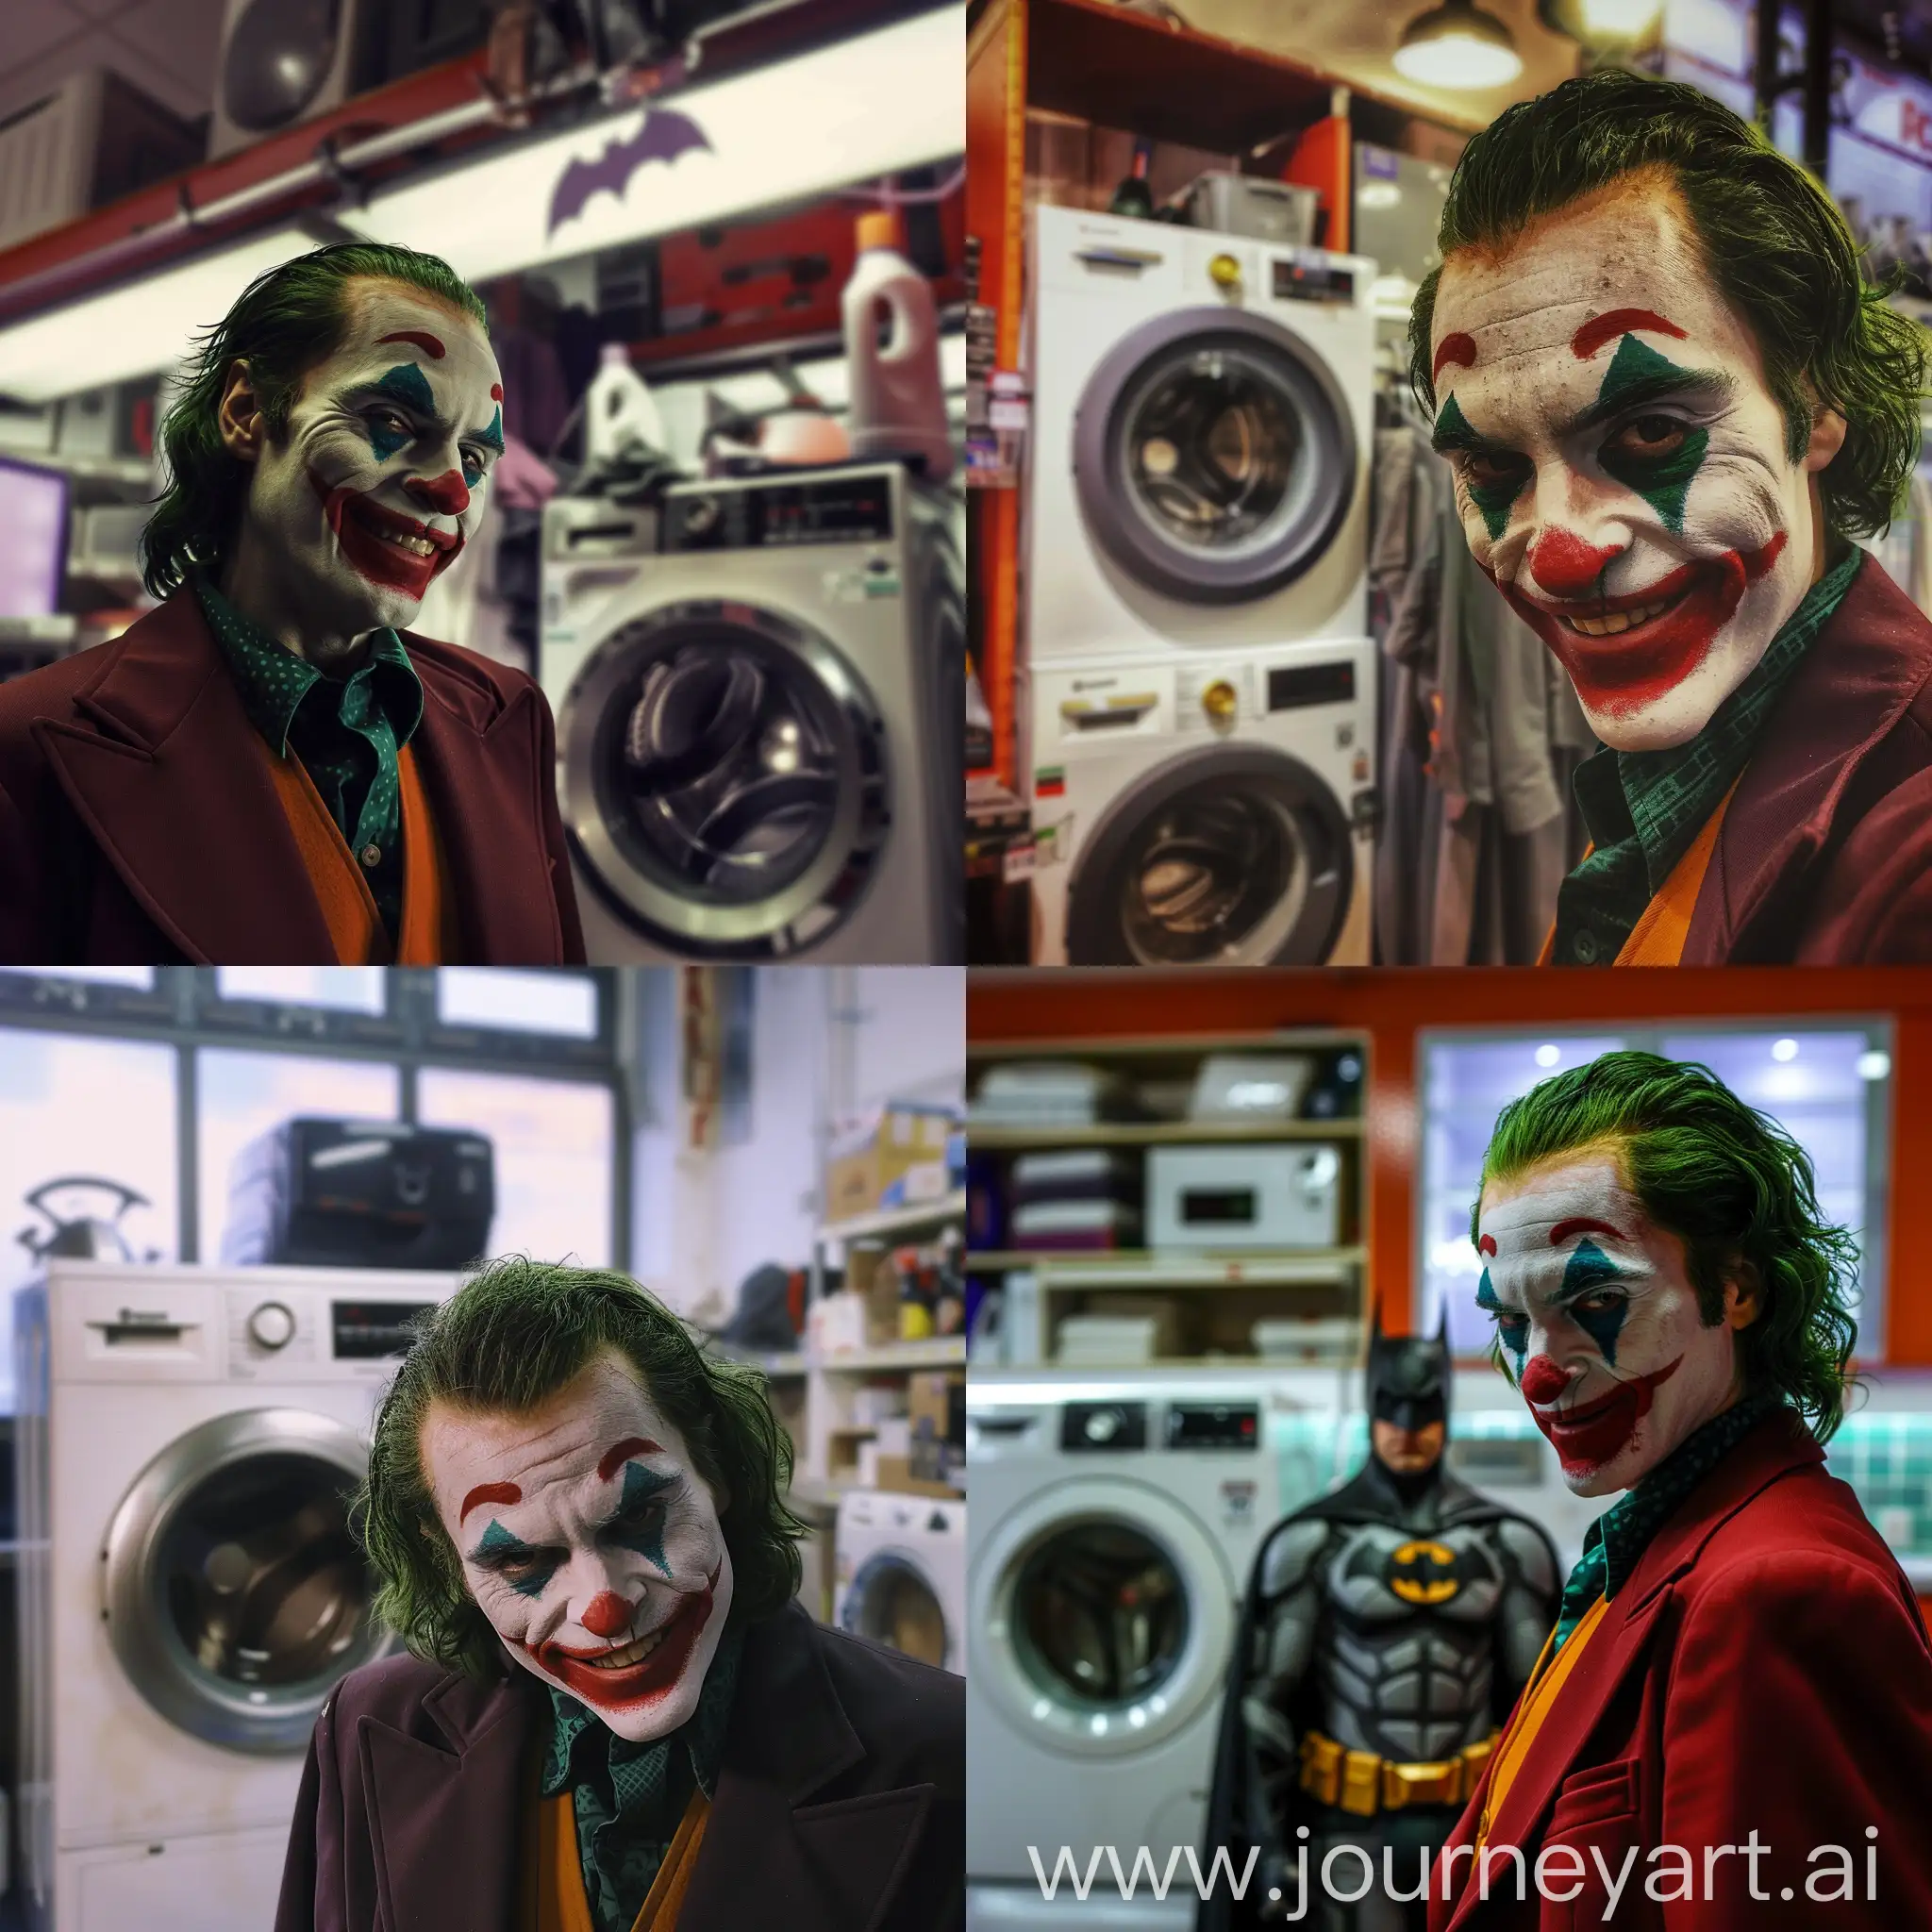 Joker is waiting for Batman to buy in a home appliance store, looking at the camera and smiling. Behind him is an image of a home appliances store washing machine refrigerator, high quality, super real, with calm colors.